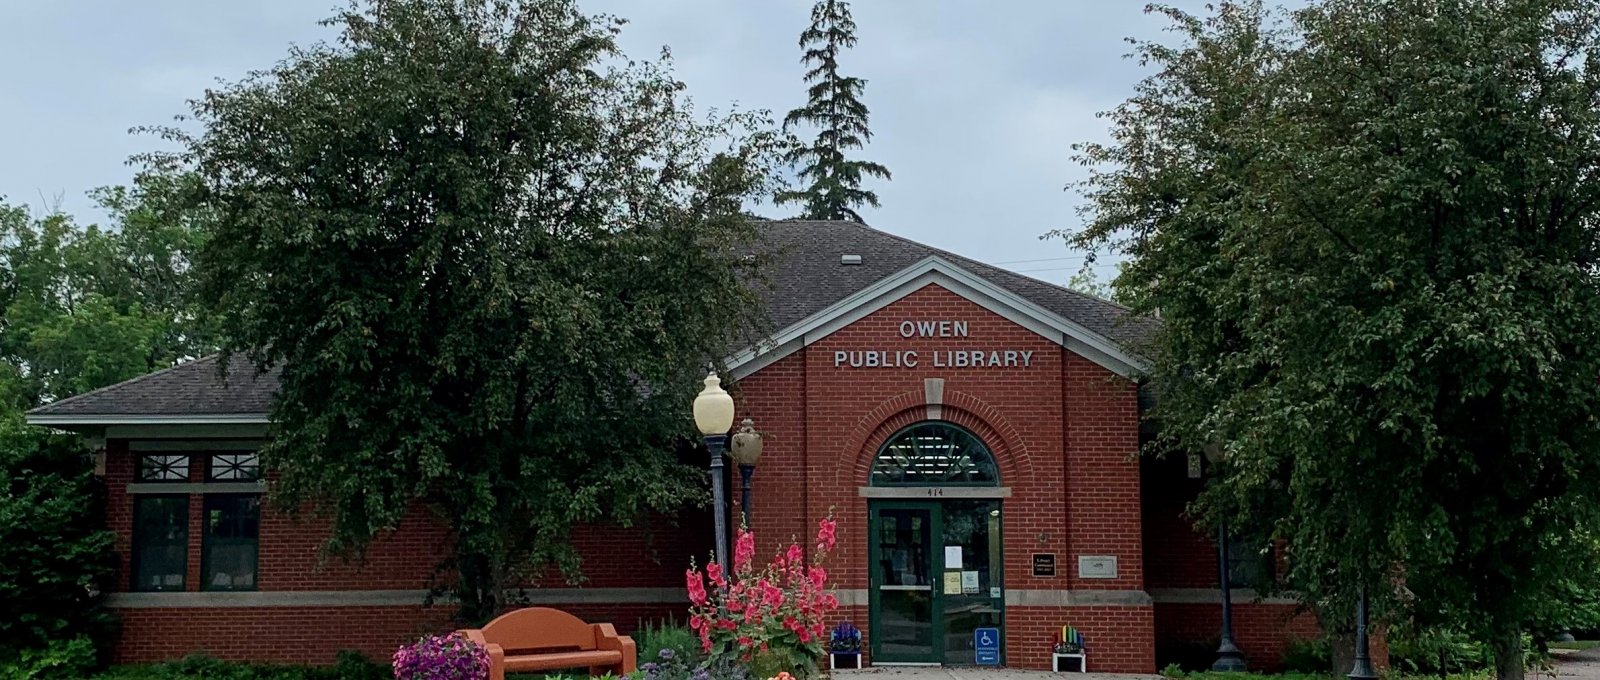 The library is open Monday - Friday from 12pm to 6pm! Use our outdoor seating for reading and WiFi use!